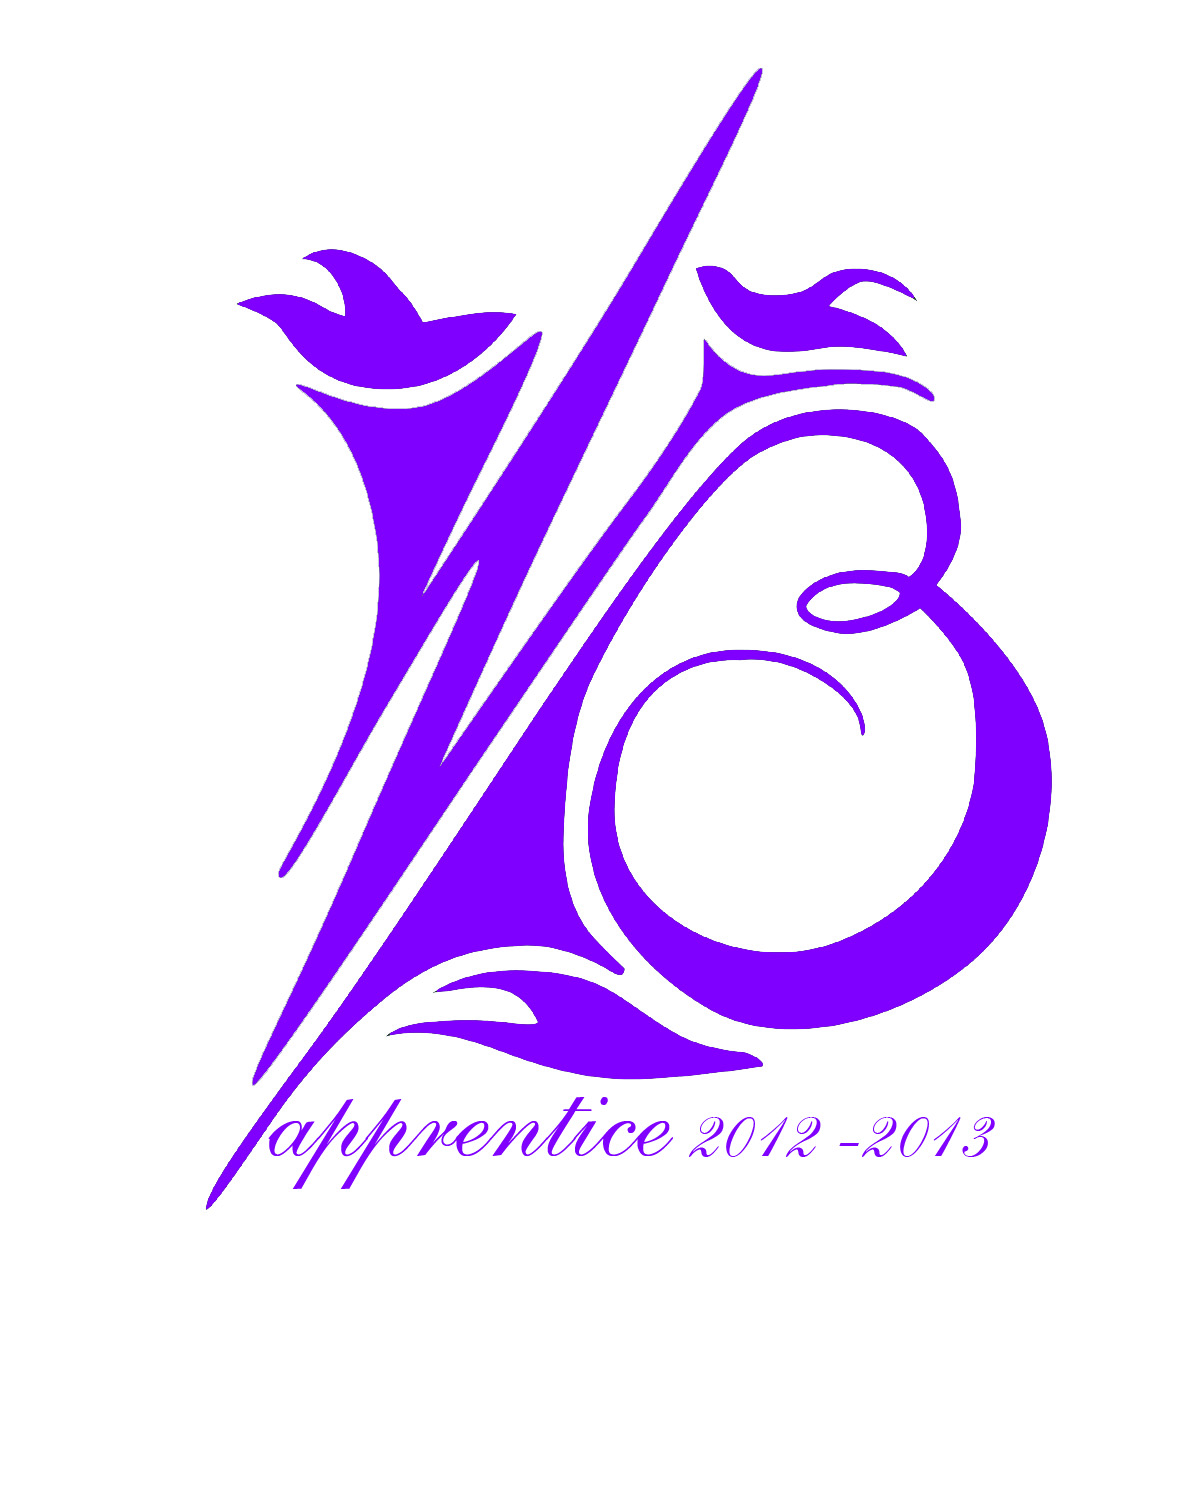 YOUR EVENTS SERVICES: Weddings Beautiful Worldwide Apprentice 2012 - 2013